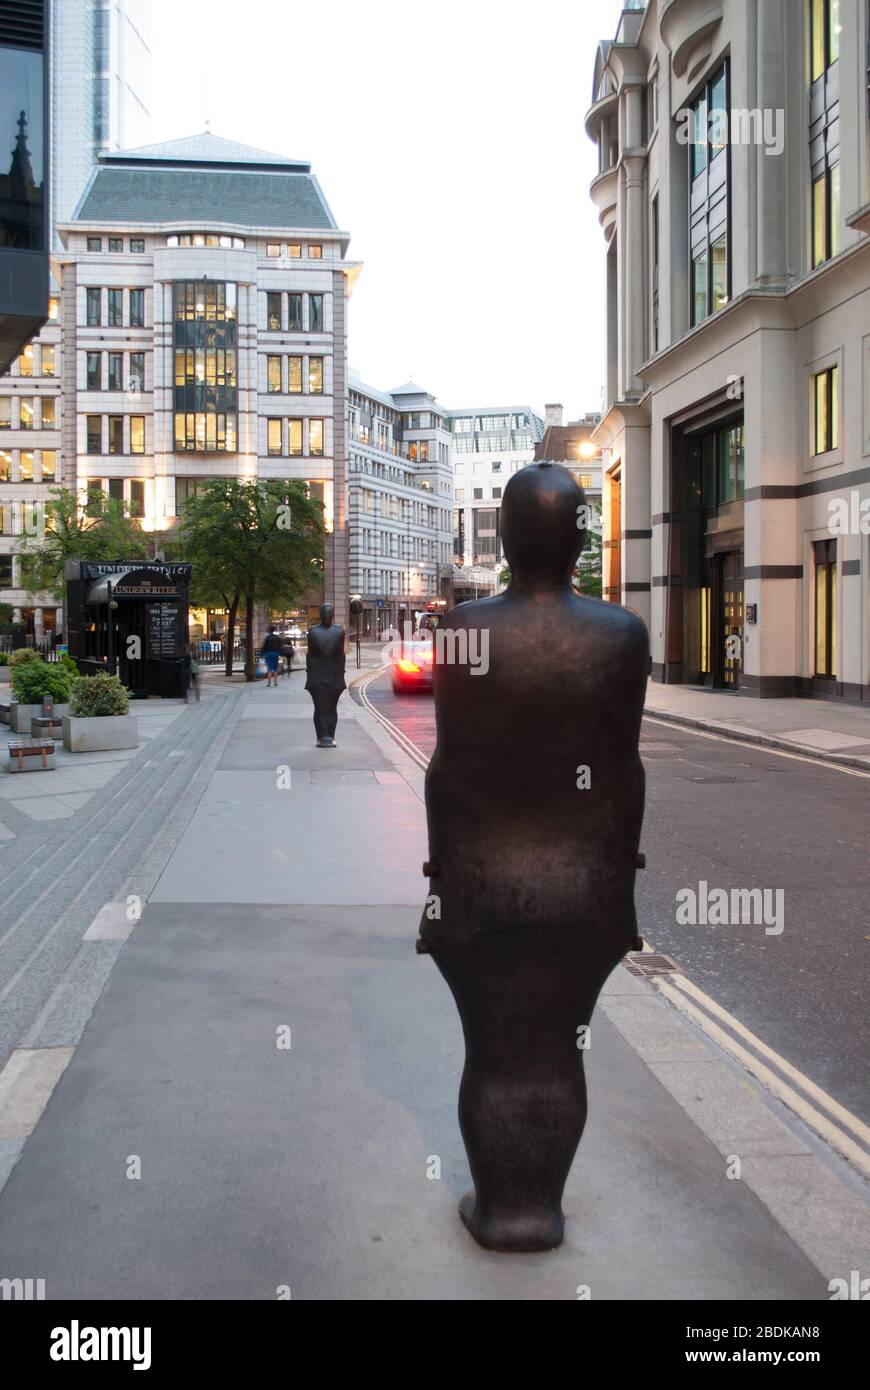 Two Iron Statues Parallel Field Sculpture in the City on St. Mary Axe, City of London EC1 Stock Photo